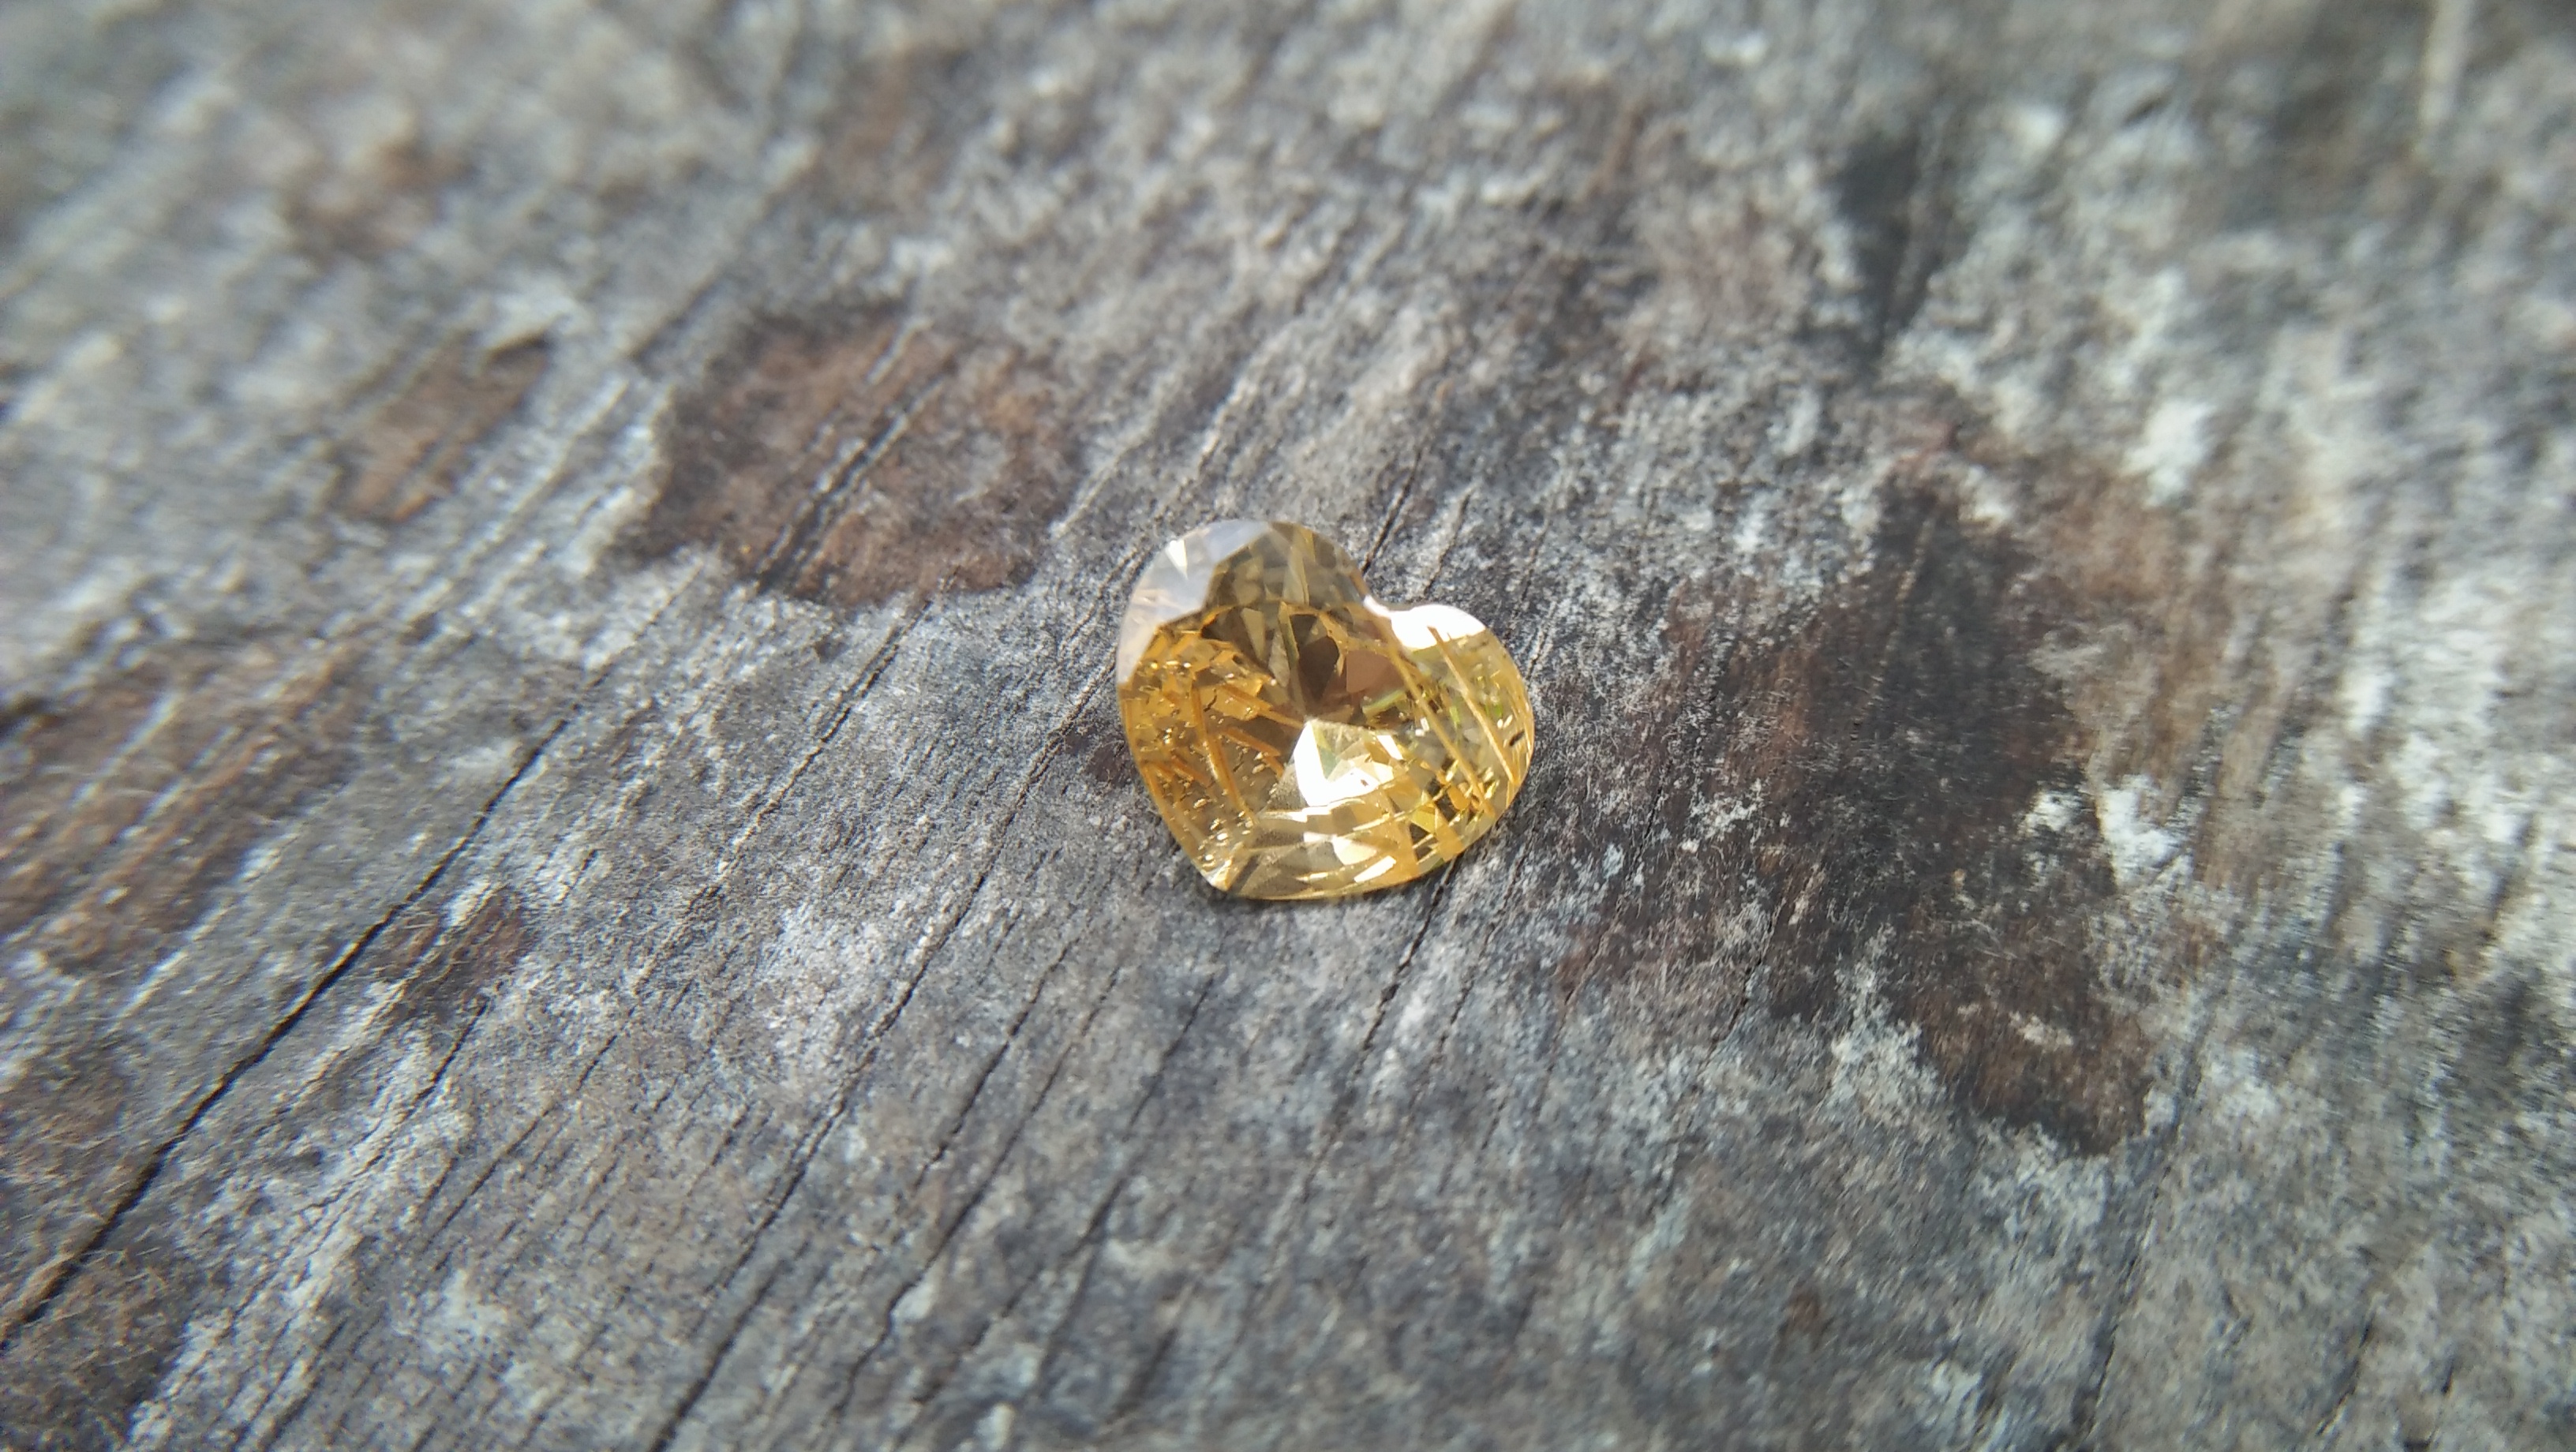 Ceylon Natural Yellow Sapphire Heart Weight : 1.05cts Dimension : 6.2mm x 7.5mm x 3.2mm Shape : Heart Colour : Yellow Treatments : Unheated/ Natural